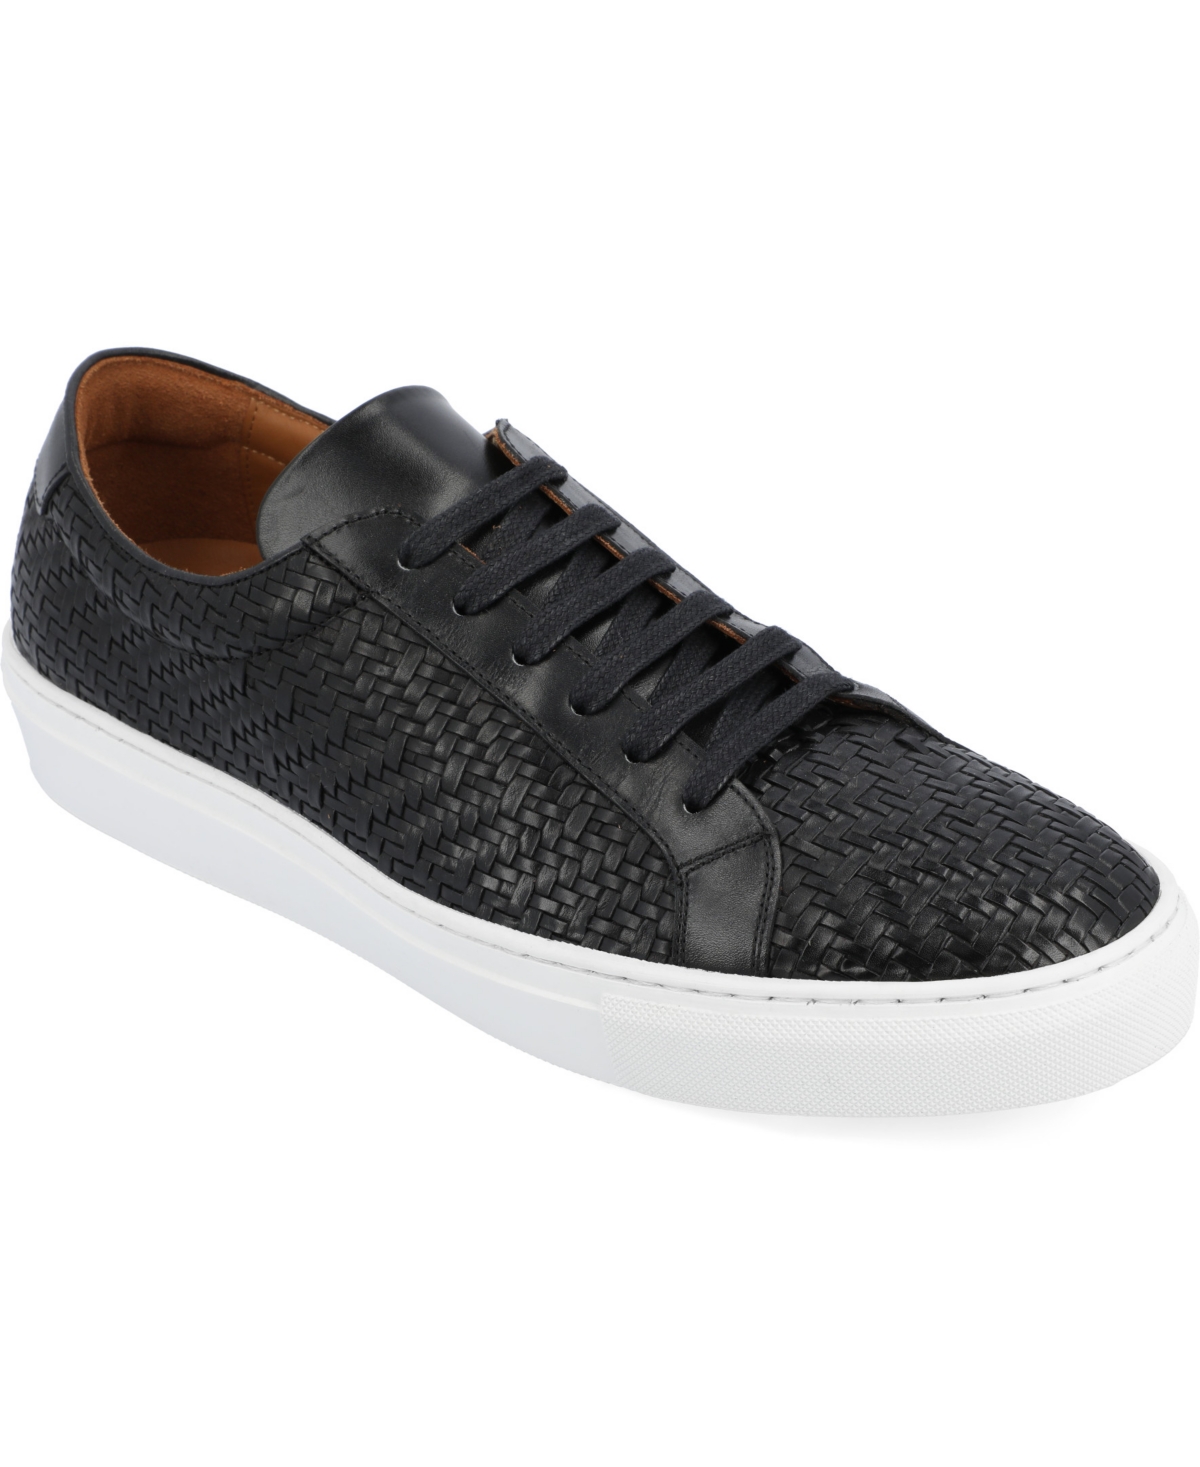 Men's Woven Handcrafted Leather Low Top Lace-up Sneaker - Black Wove